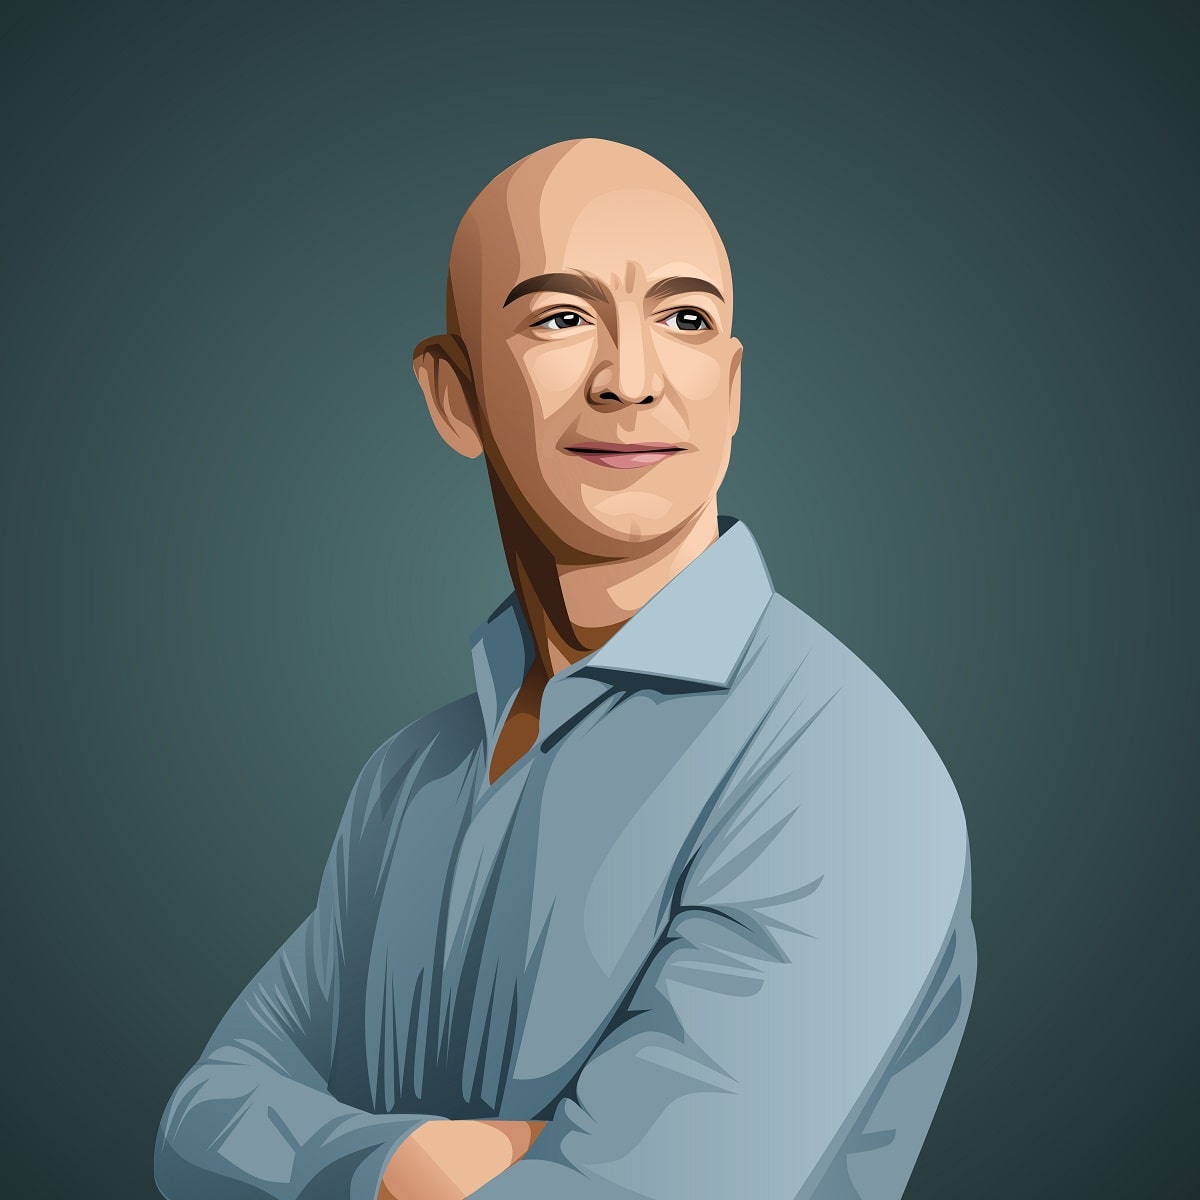 Jeff Bezos © Inspirationfeed. All rights reserved.